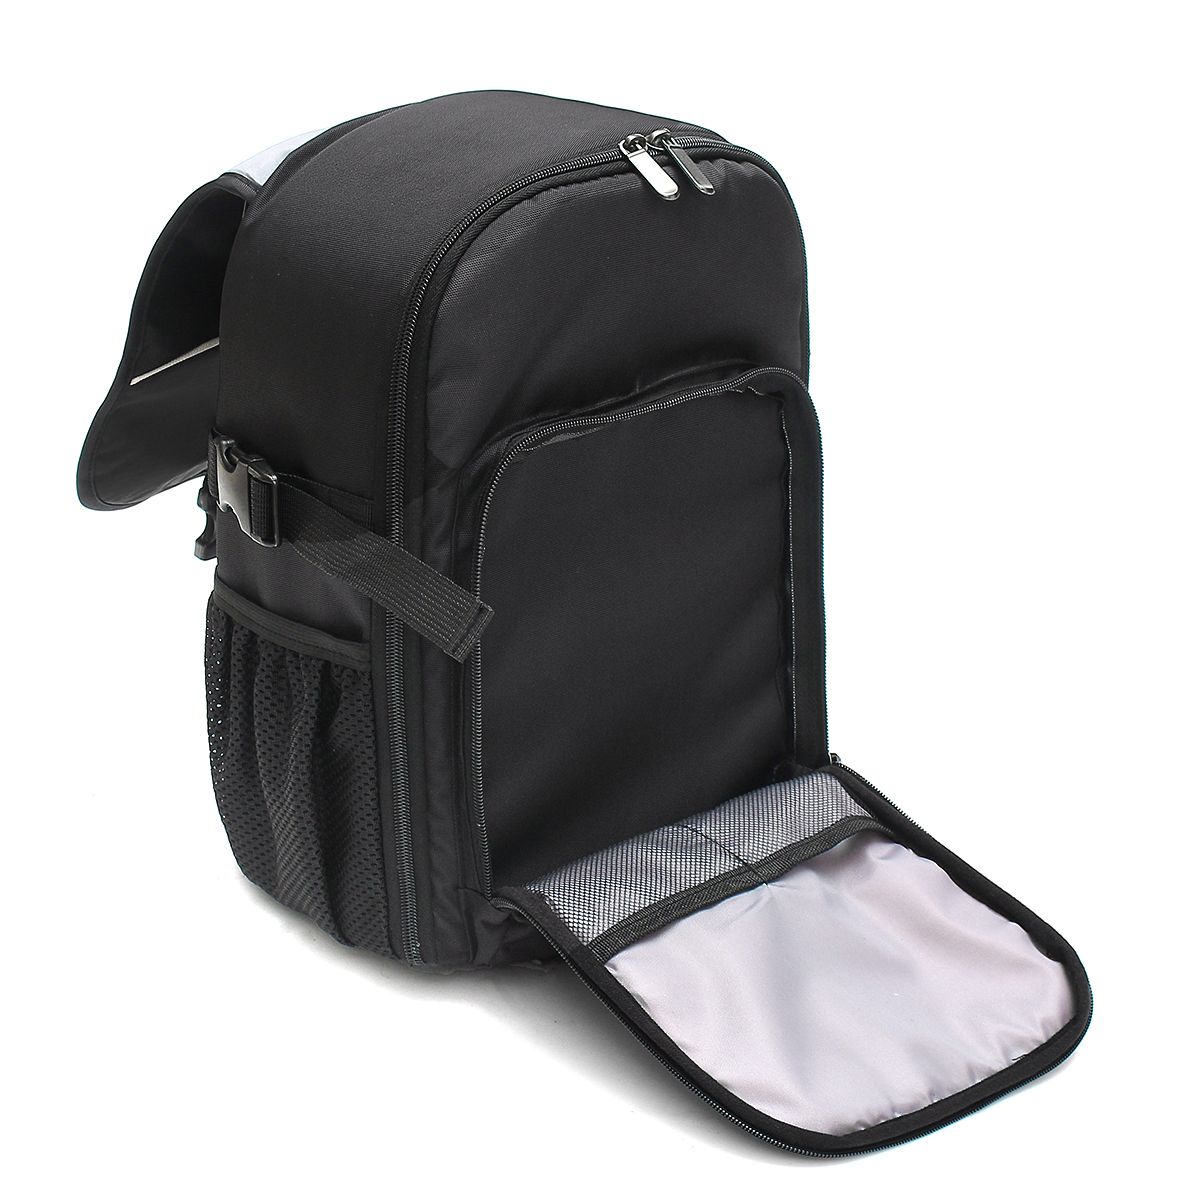 Waterproof-Backpack-Camera-Bag-with-Padded-Bag-for-DSLR-Camera-Lens-Accessories-1339113